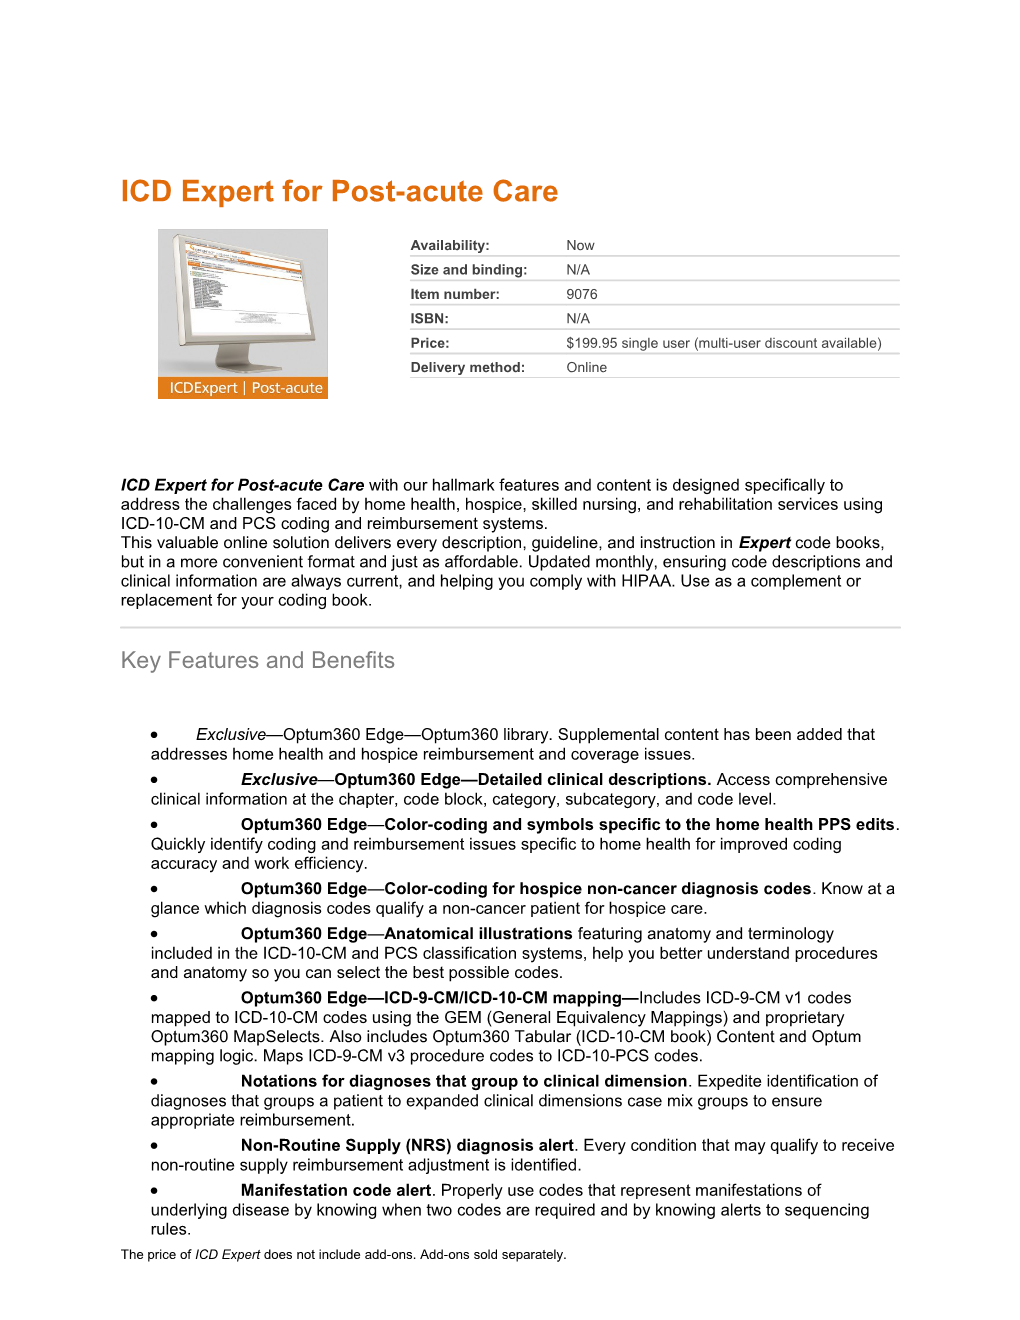 ICD Expert for Post-Acute Care